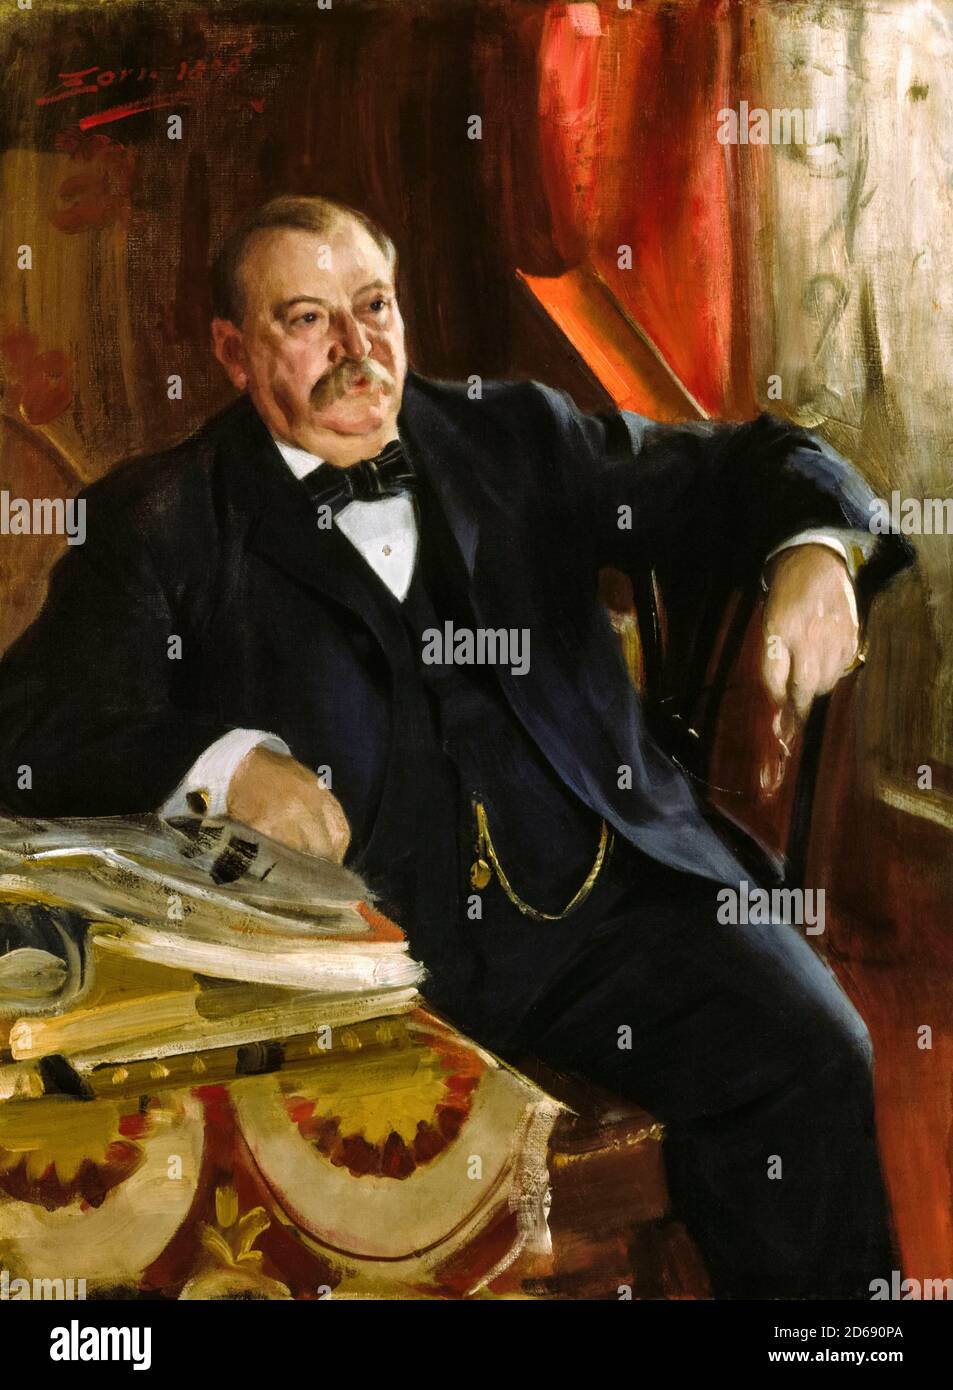 Grover Cleveland (1837-1908), American politician who was the 22nd and 24th President of the United States, portrait painting by Anders Zorn, 1899 Stock Photo